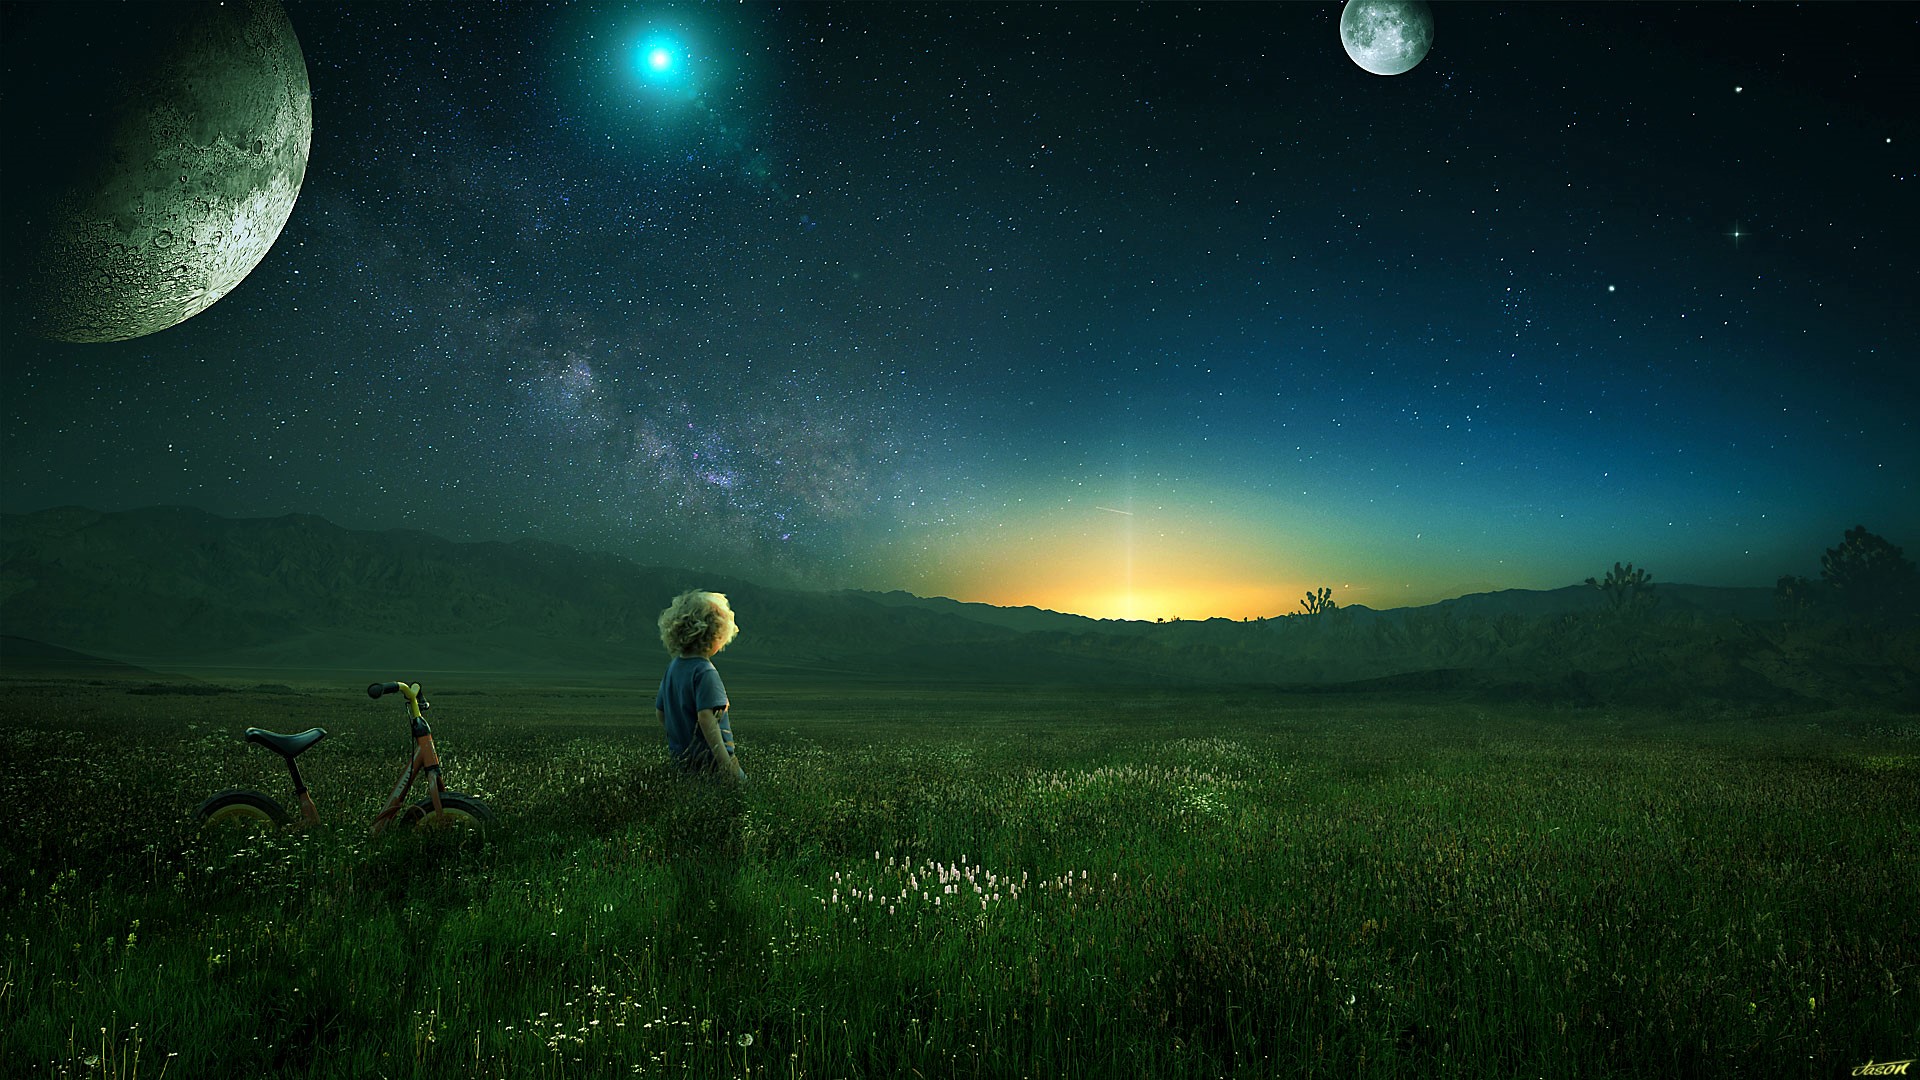 bicycle, photography, manipulation, field, little boy, photoshop, planet, stars